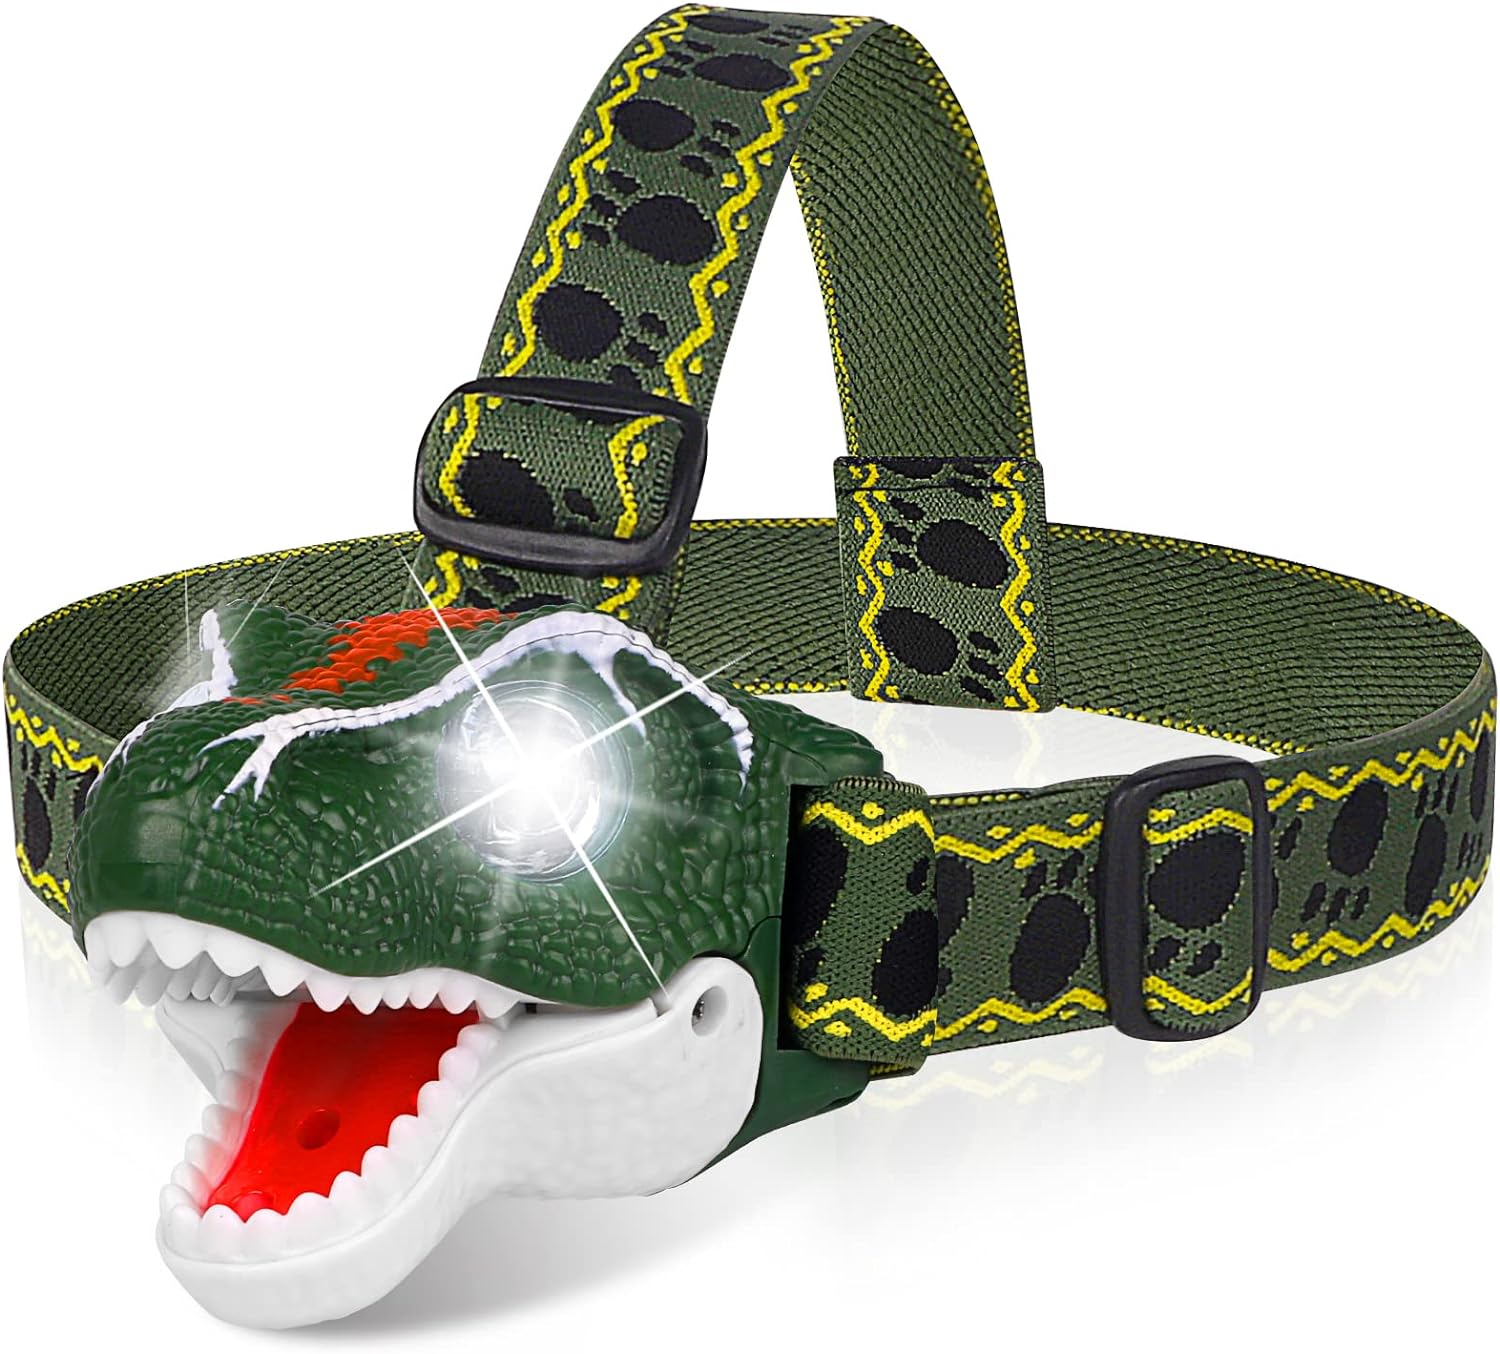 DX DA XIN Dinosaur LED Headlamp T-Rex for Kids Flashlights Camping Gear - Dinosaur Toys for Boys Girls Toddlers Outdoor Toys for Kids Birthday Christmas Gifts Stocking Stuffers